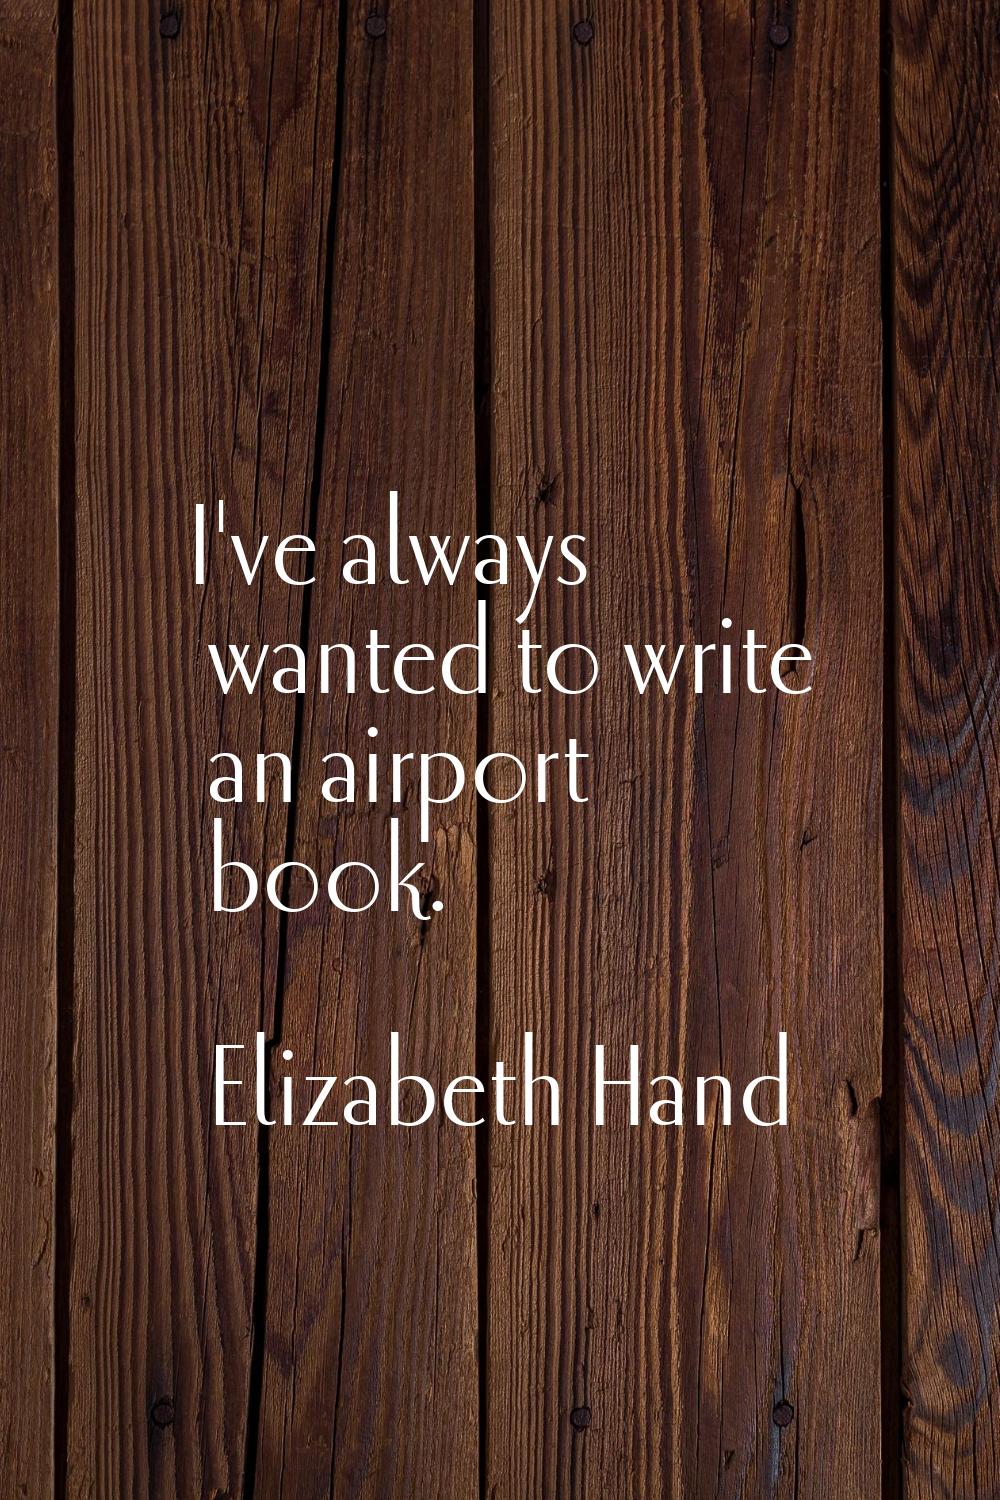 I've always wanted to write an airport book.